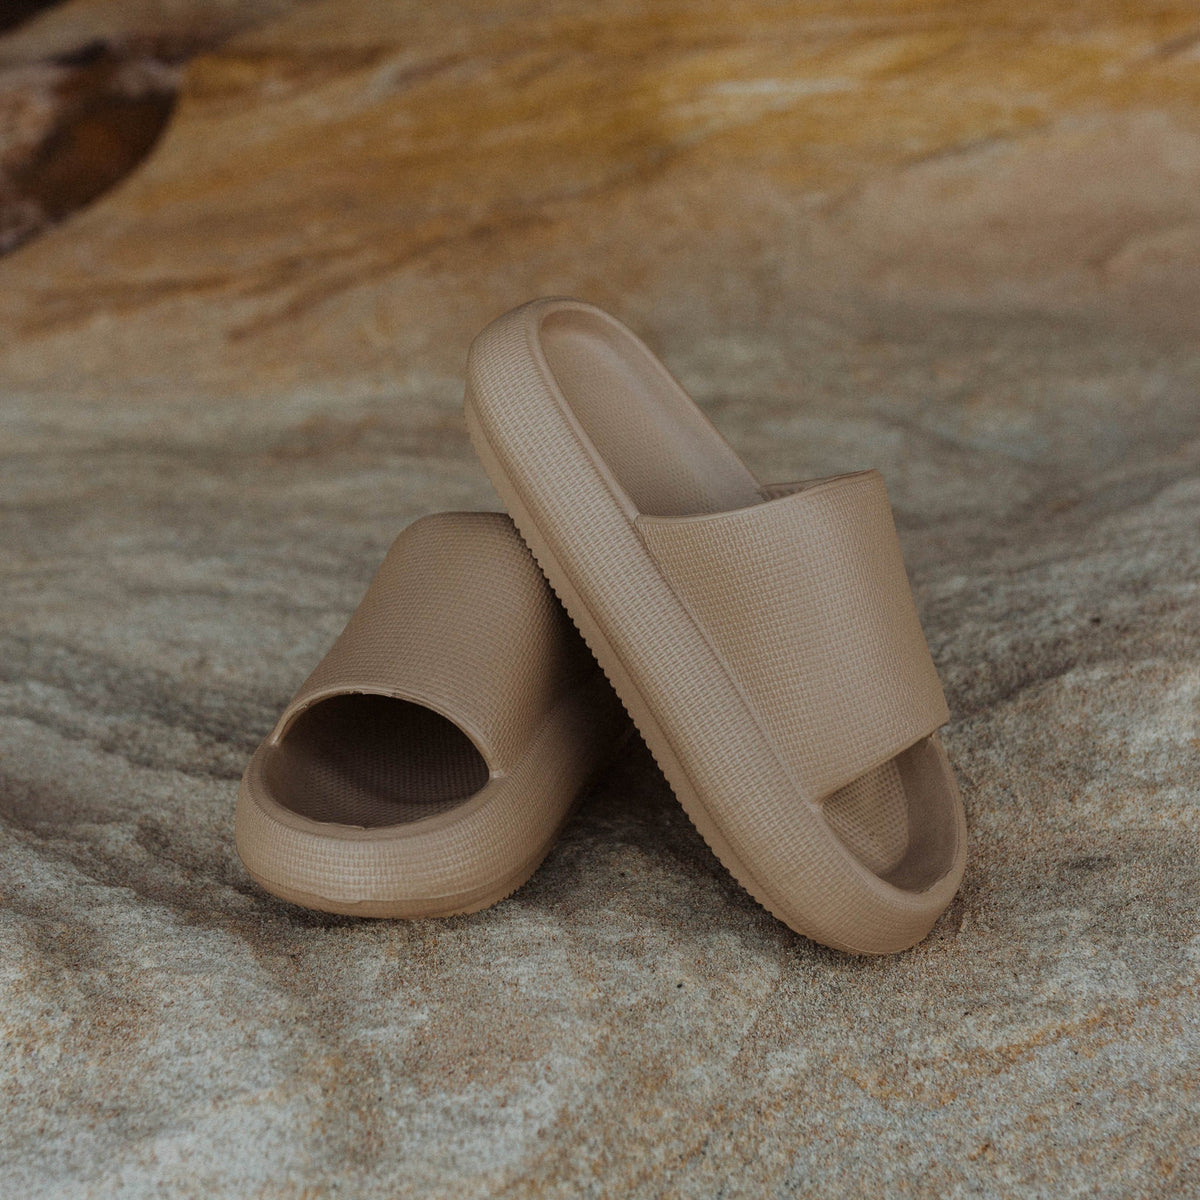 Brown Mocha Tunes Shoes, Lightweight & Waterproof Sandals & Slides For All Terrain, RubbaBubba